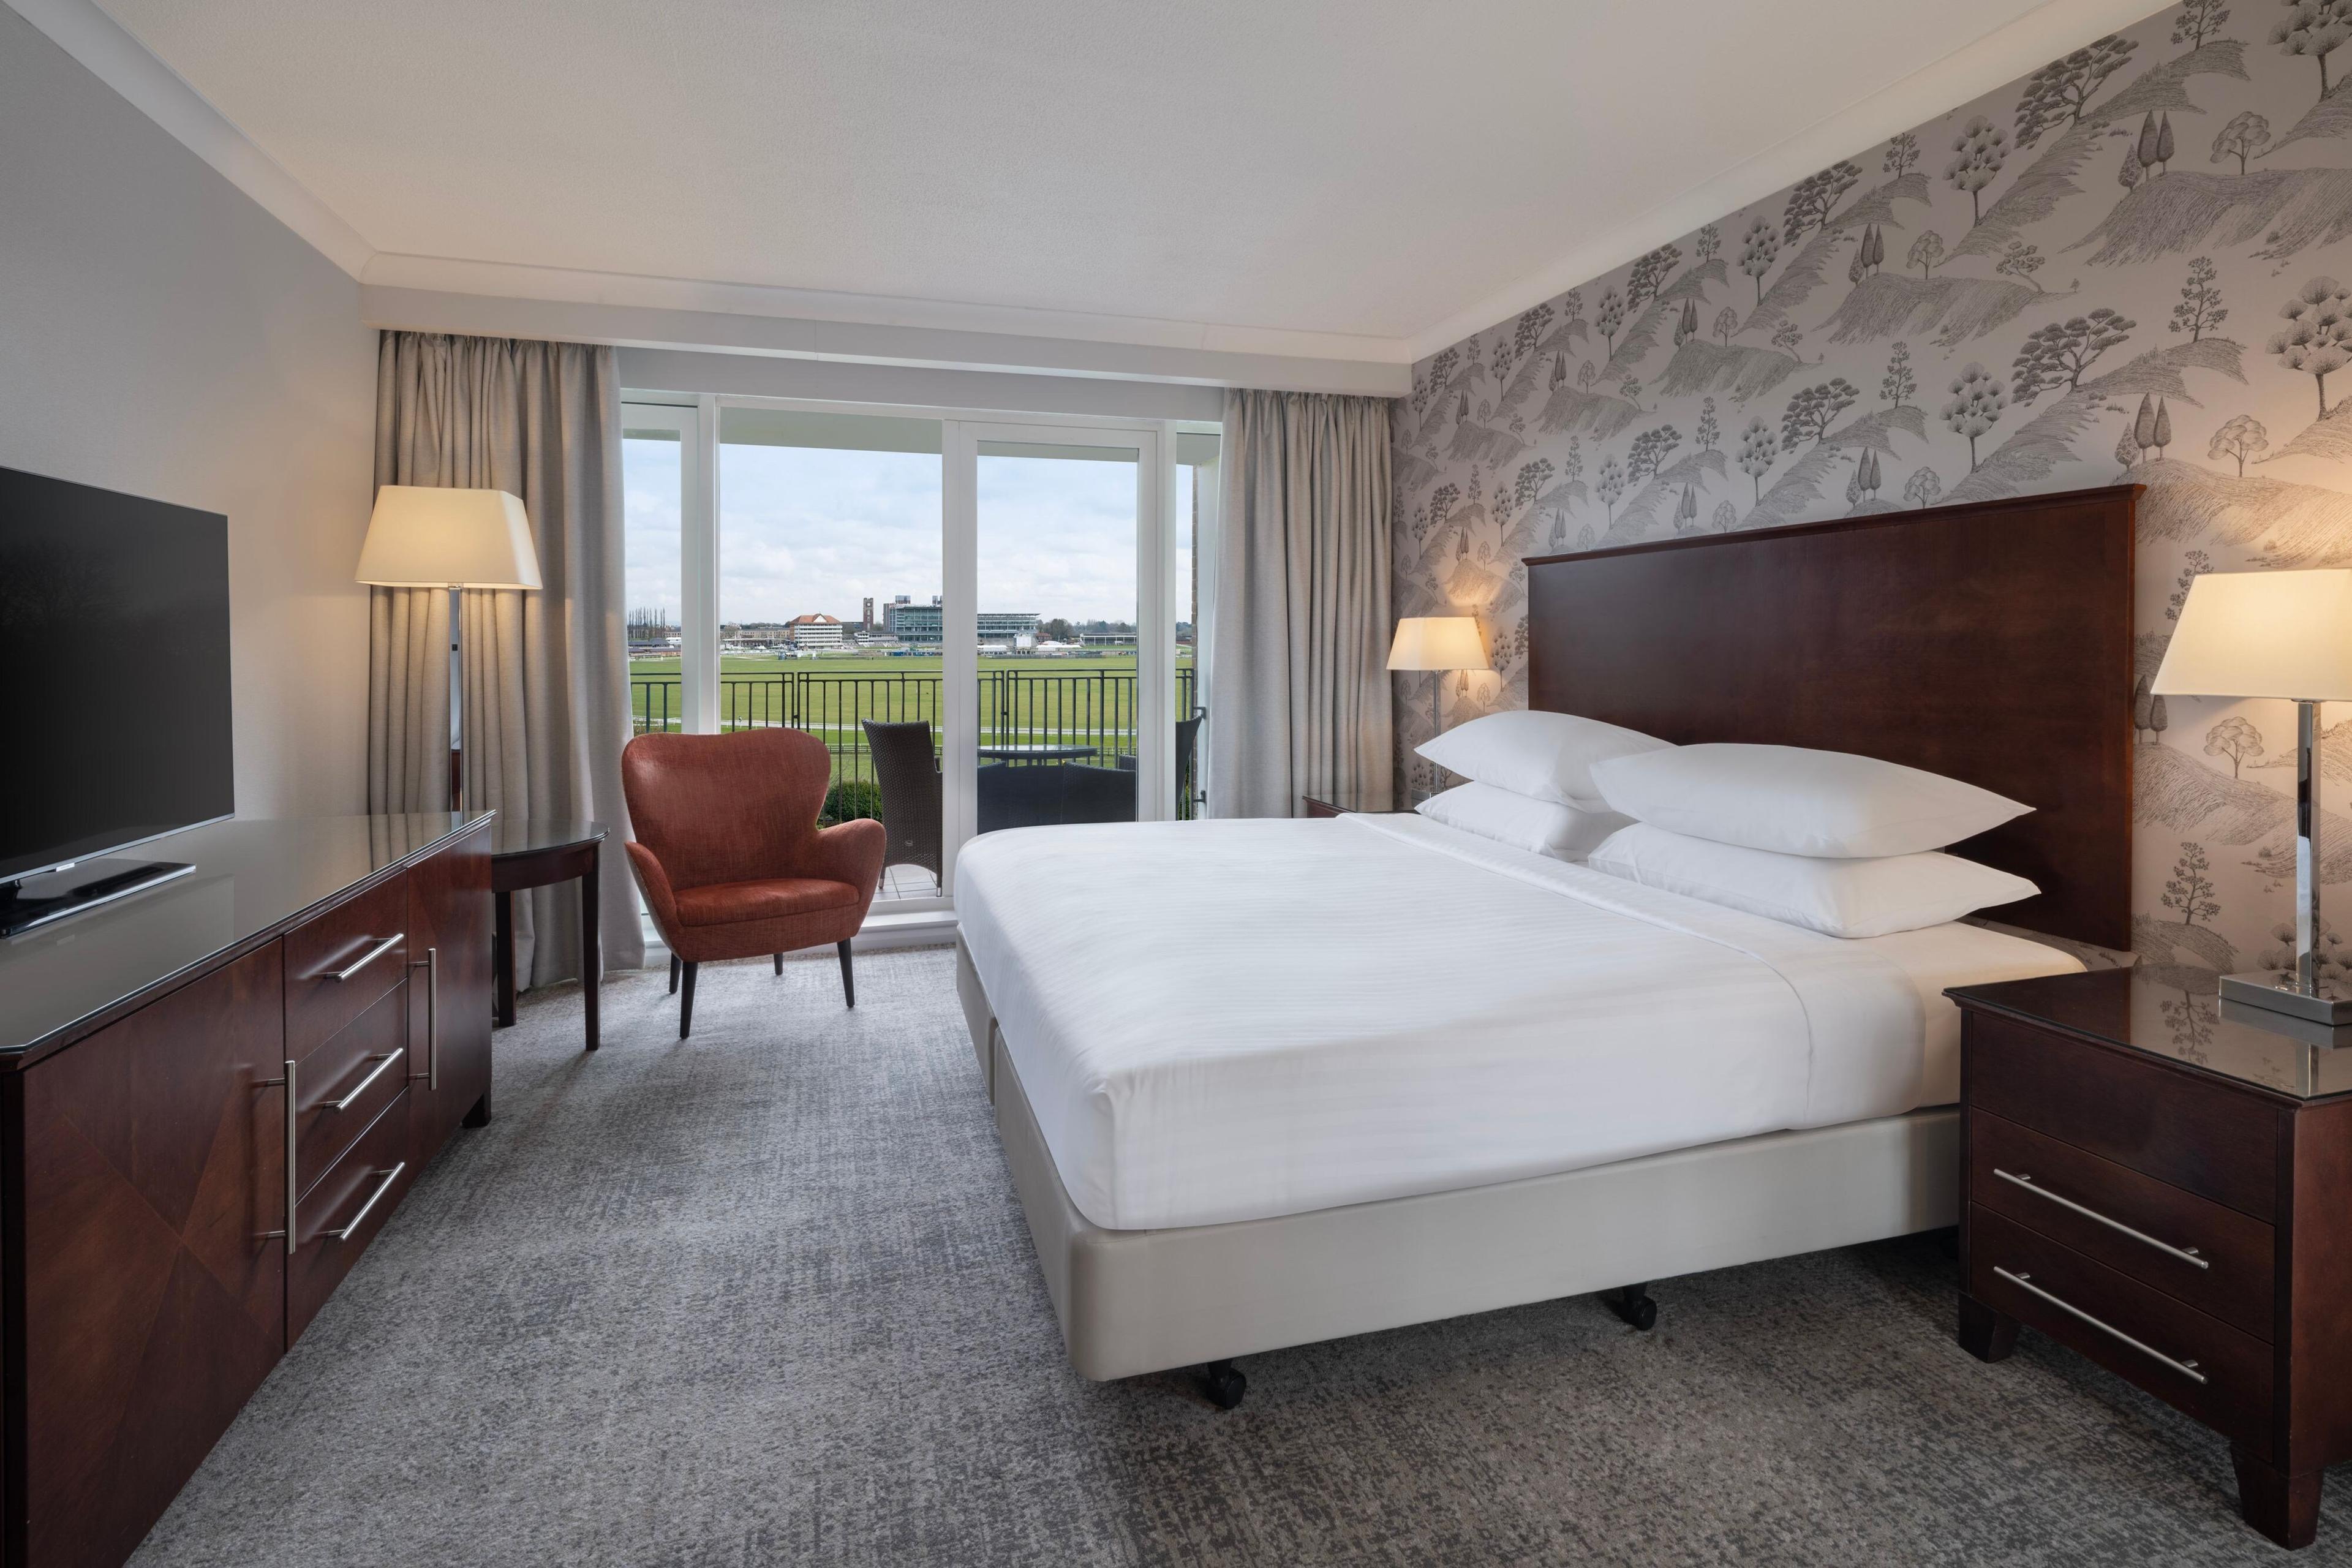 Spacious Grandstand guest bedroom with views of York Racecourse from a patio or balcony, kingsize bed and sitting area with, flatscreen TV, free WiFi and complimentary parking.